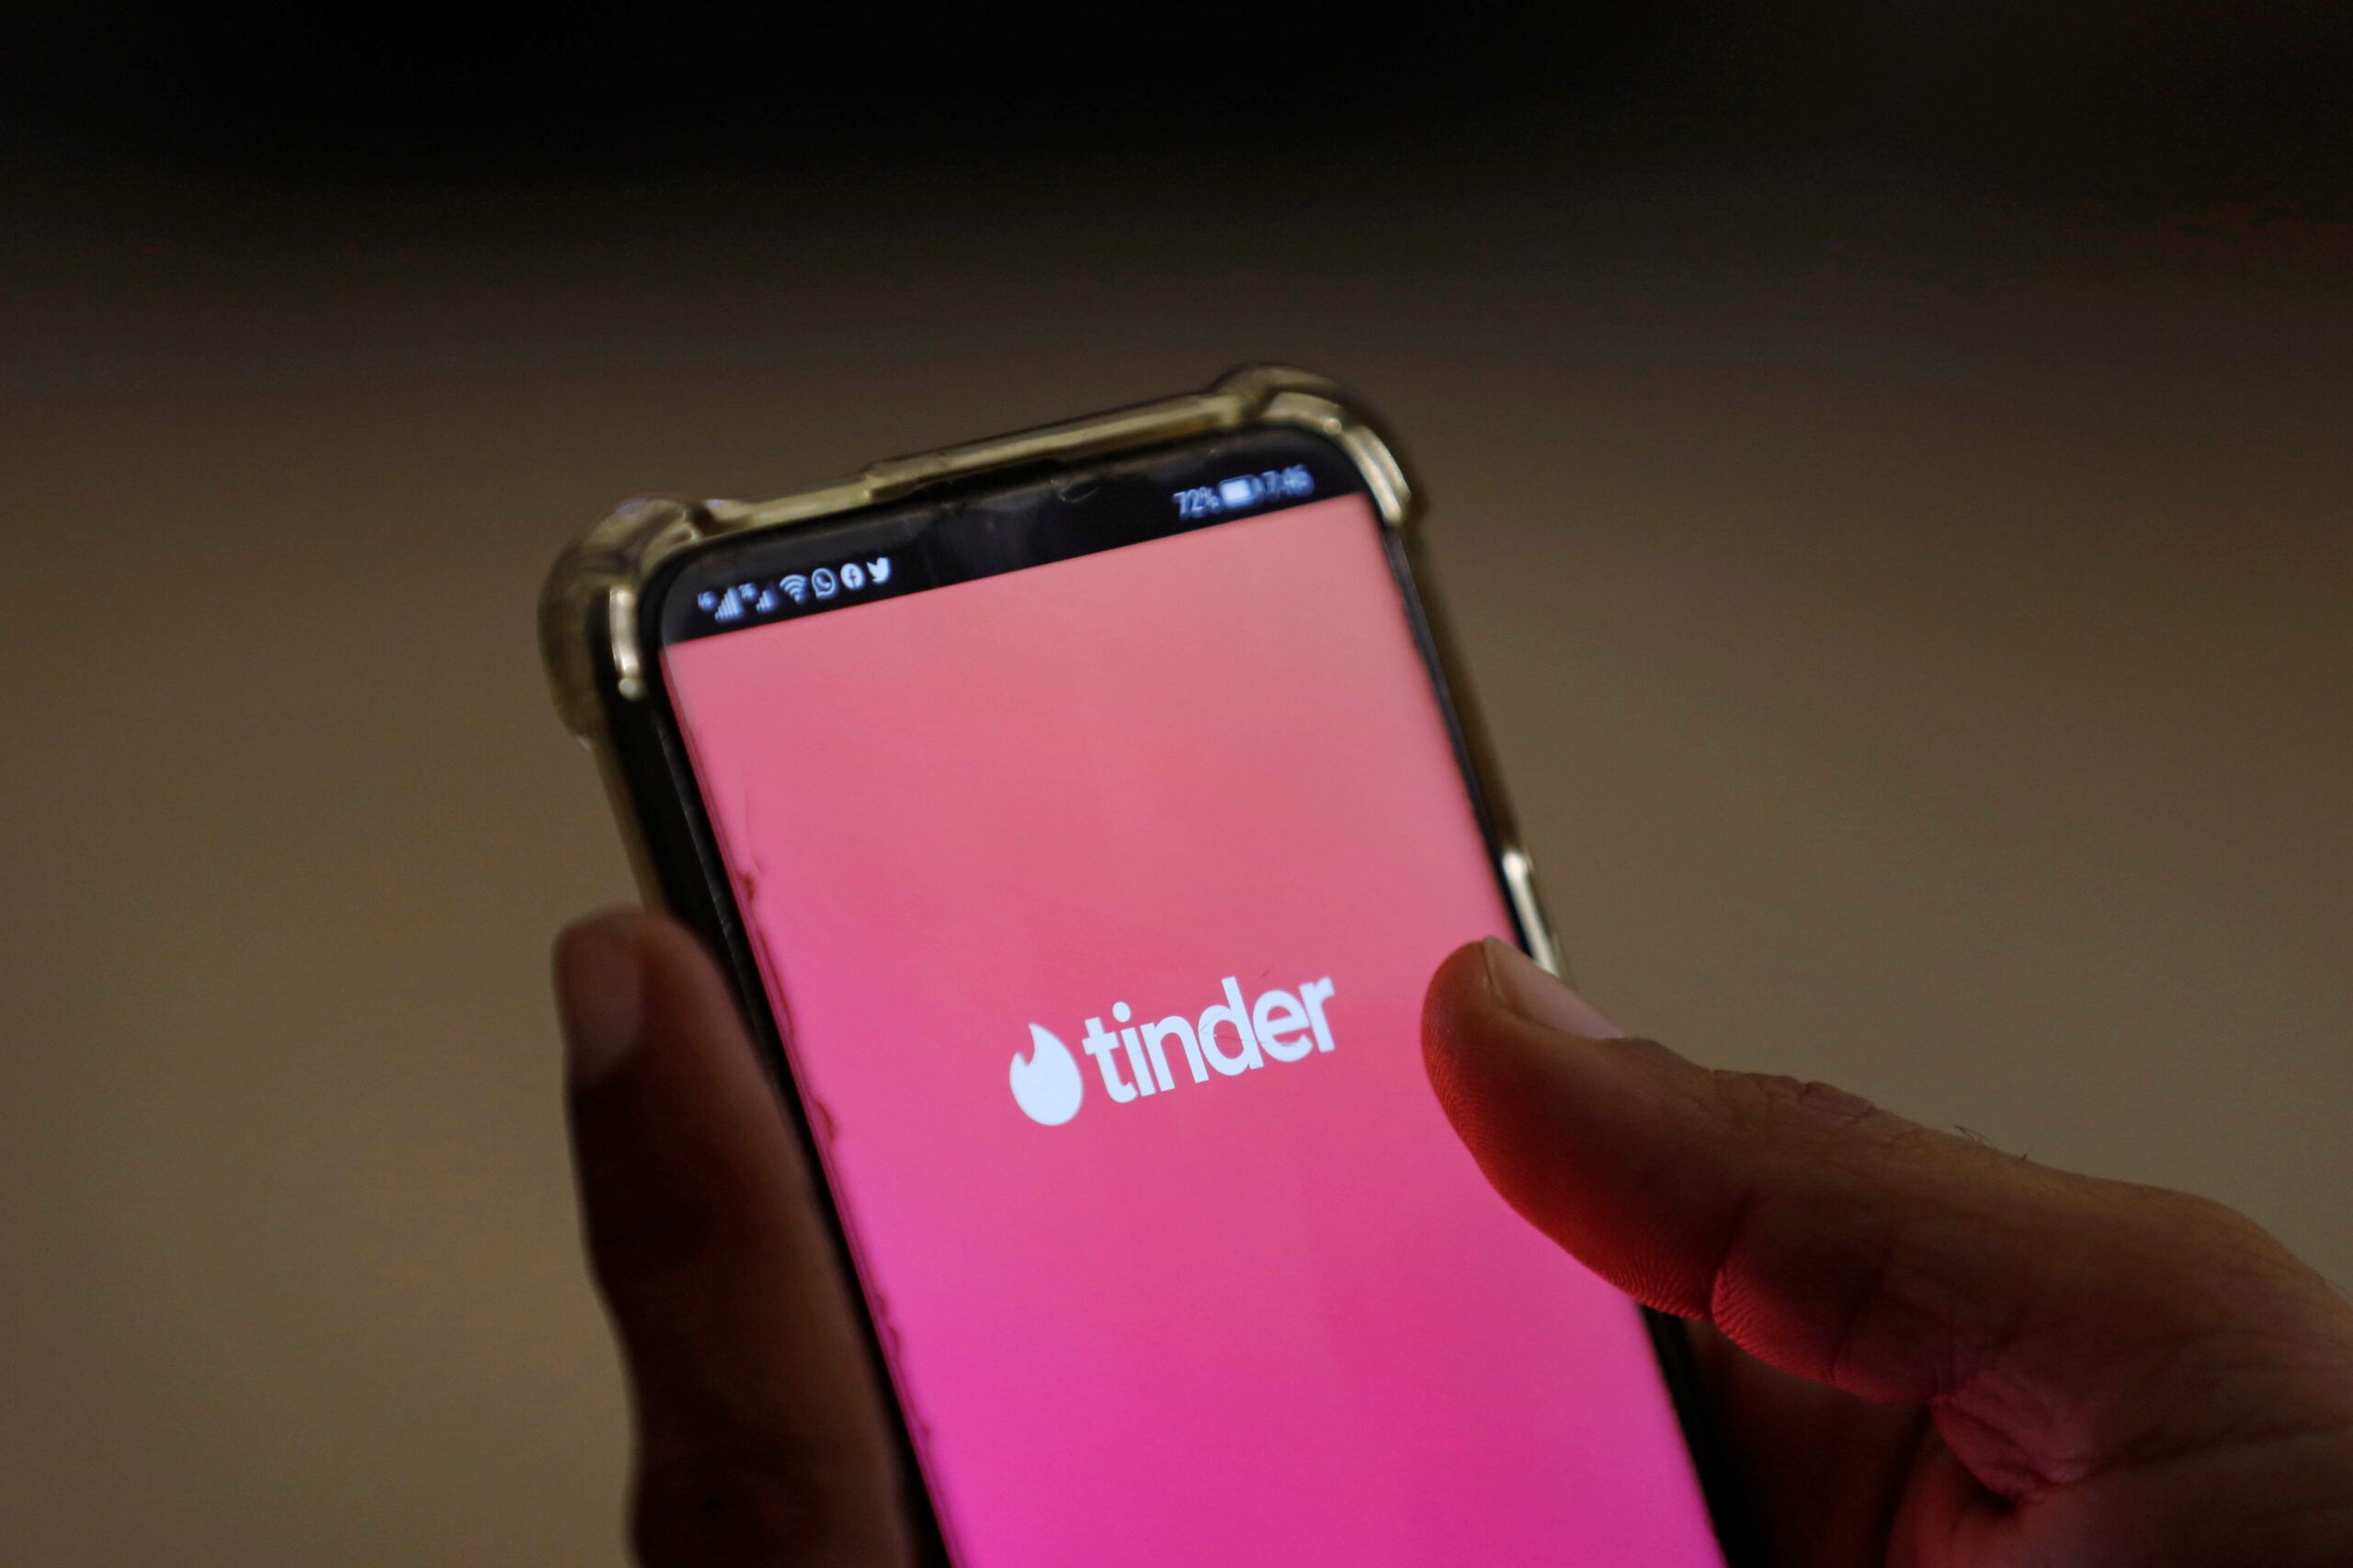 “Russian Court Imposes Fines on Tinder and Twitch for Non-Compliance with Data Localization Regulations”